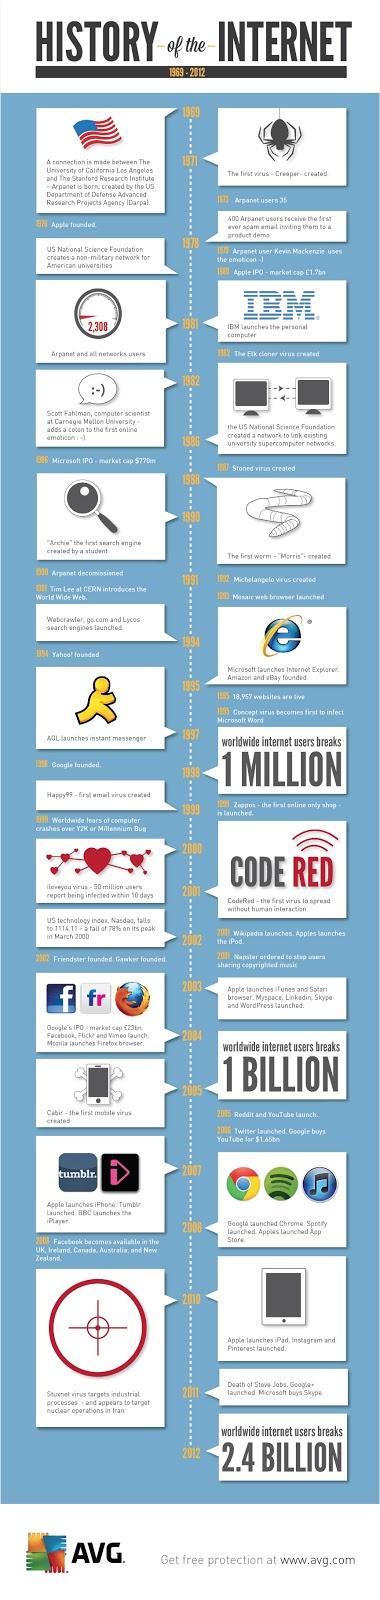 The history of the Internet - How was it born?